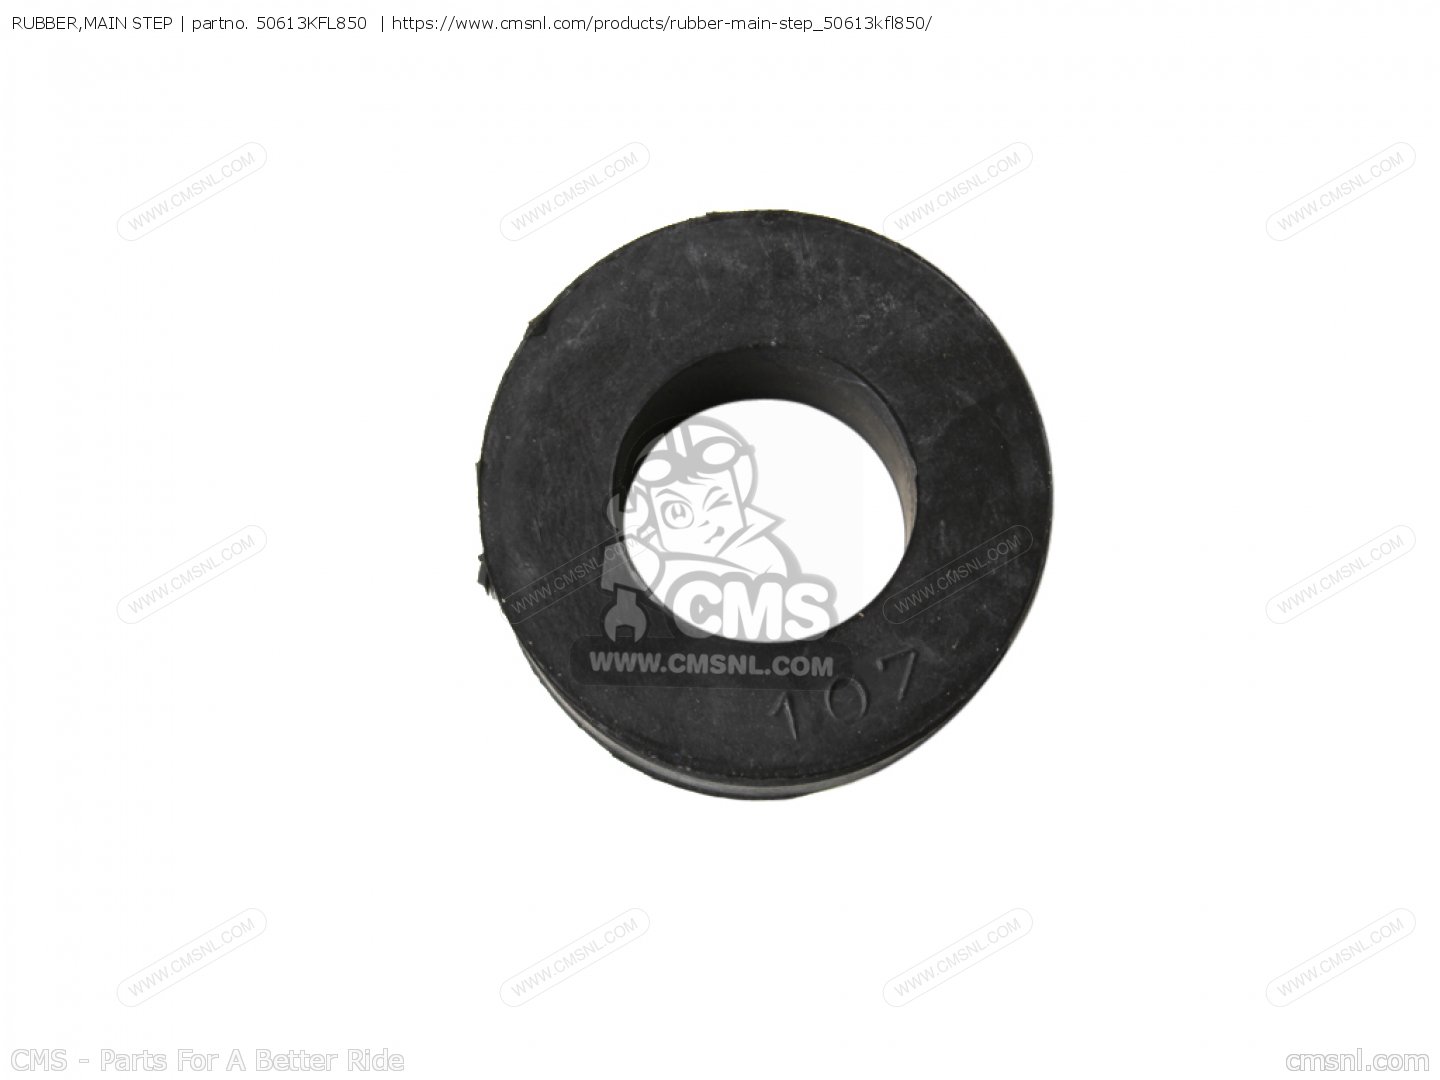 RUBBER,MAIN STEP for ANF125 INNOVA 2003 (3) EUROPEAN DIRECT SALES ...